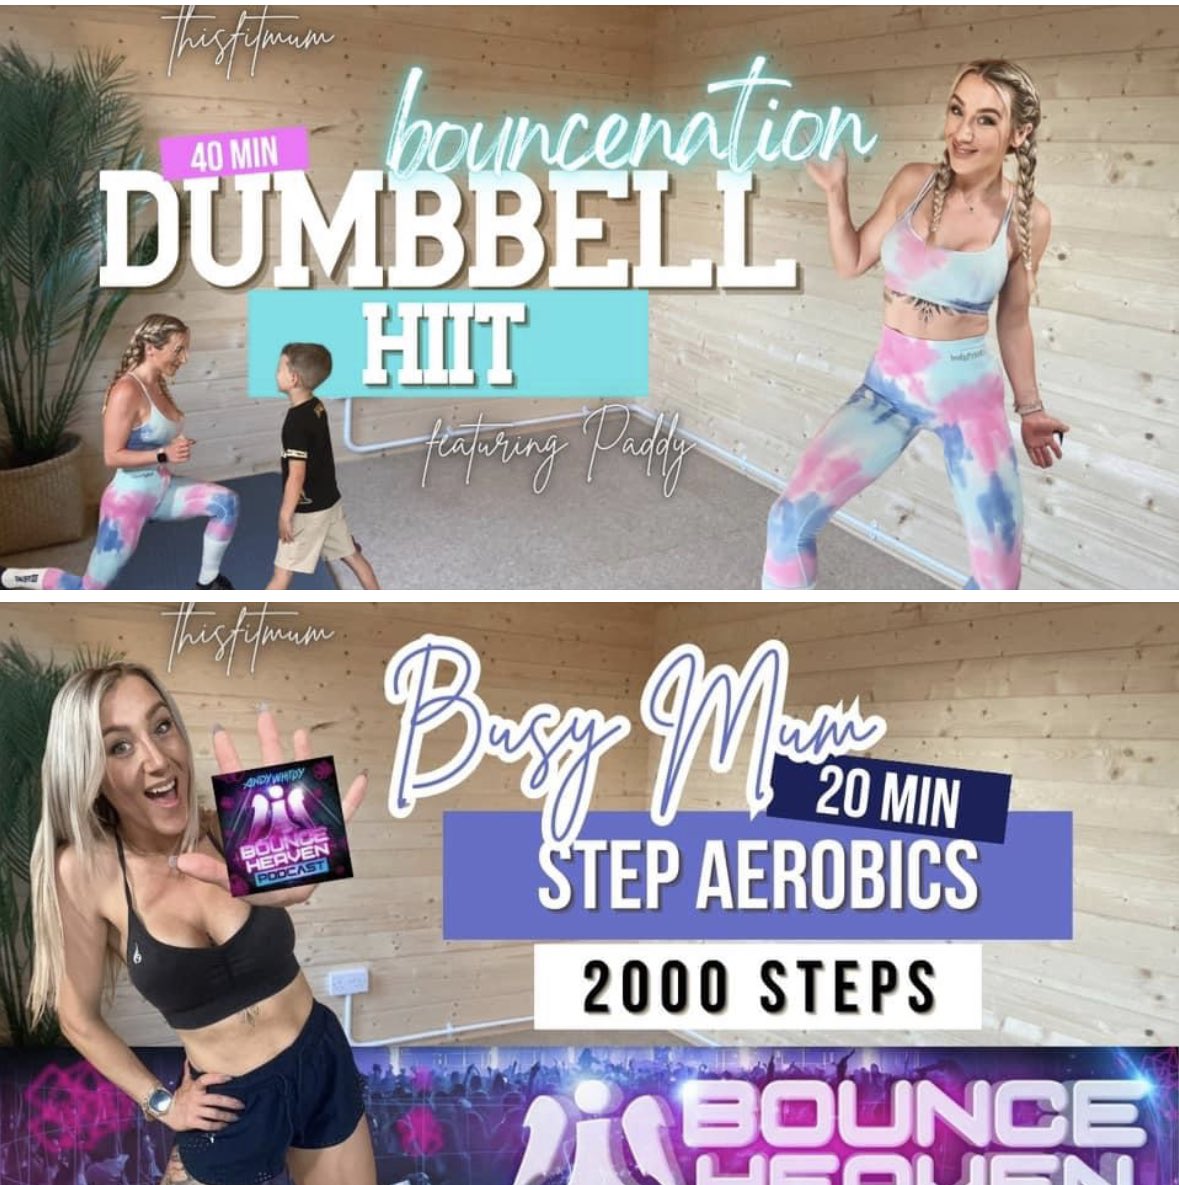 THISFITMUM FREE Home workouts! New dumbbell hiit on YouTube and a new stepper available from tomorrow - youtube.com/@ThisFitMum 

#hiit #homeworkout #sundayvibes #twittermums #busymum #mumboss #girlboss